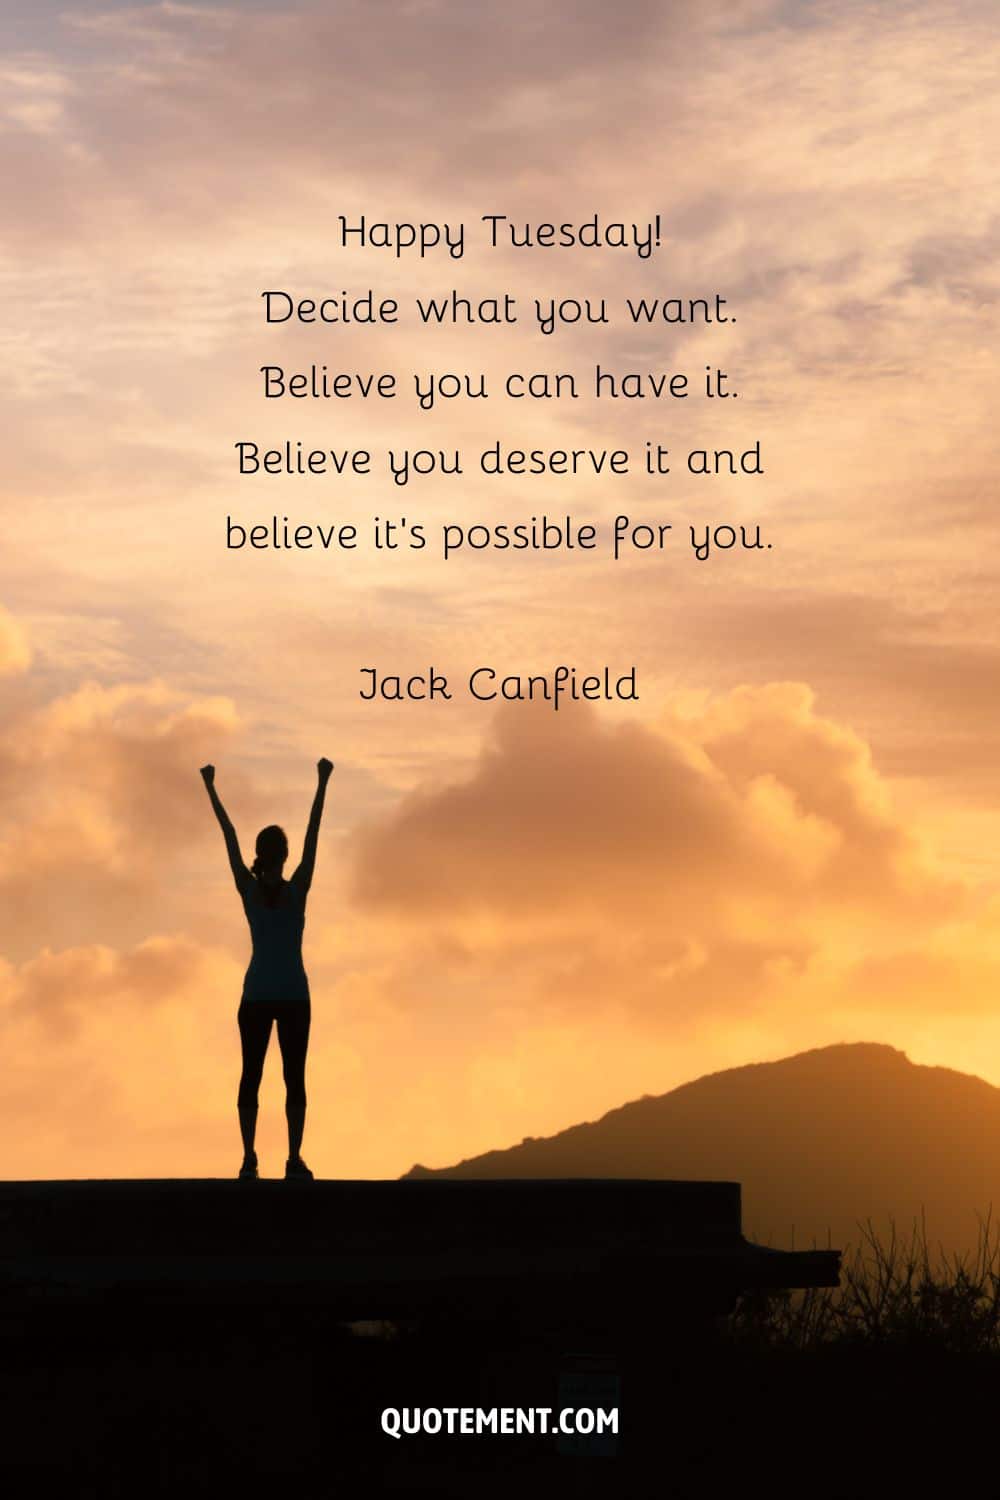 “Happy Tuesday! Decide what you want. Believe you can have it. Believe you deserve it and believe it’s possible for you.” — Jack Canfield